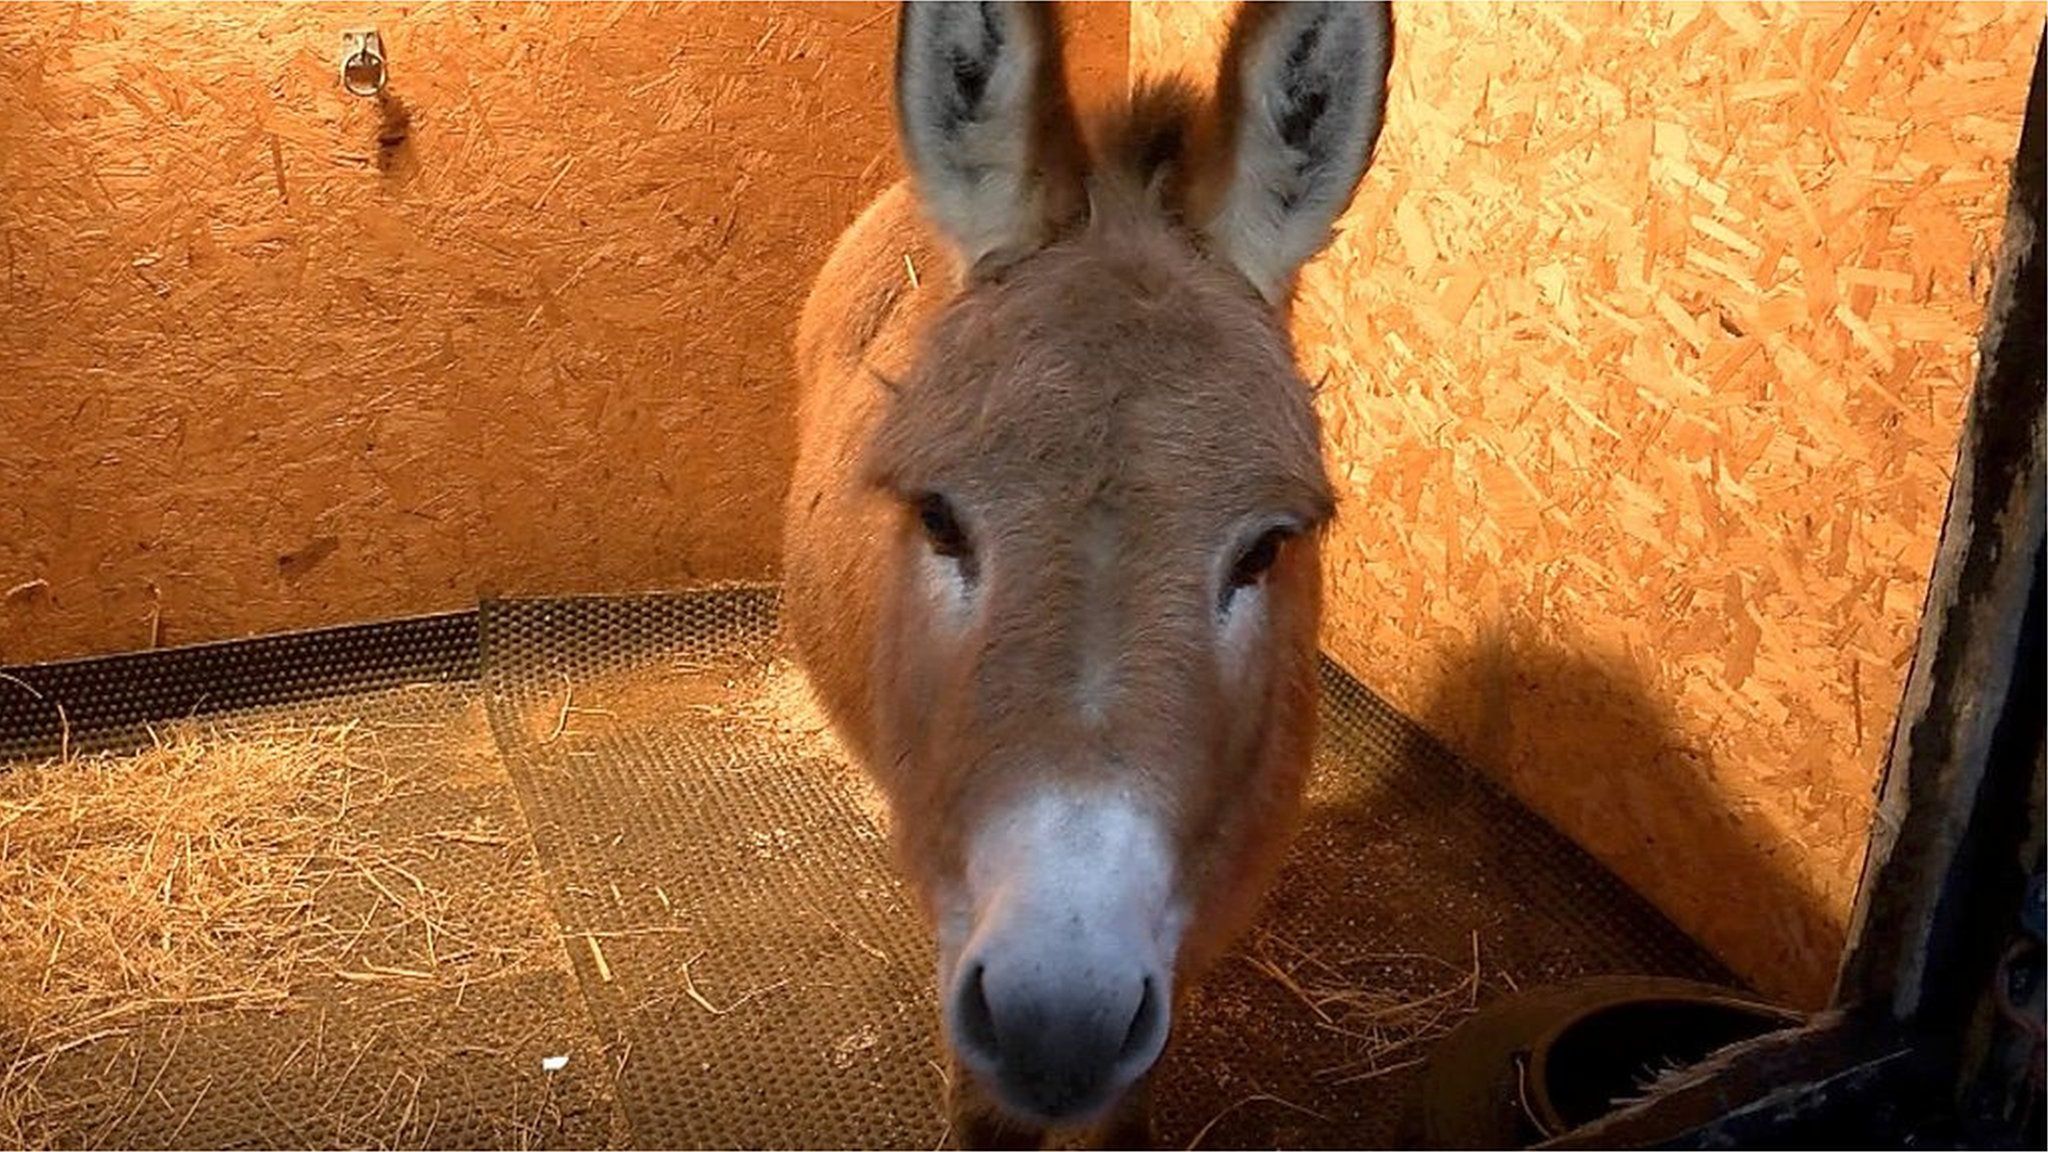 Donkey in a stable